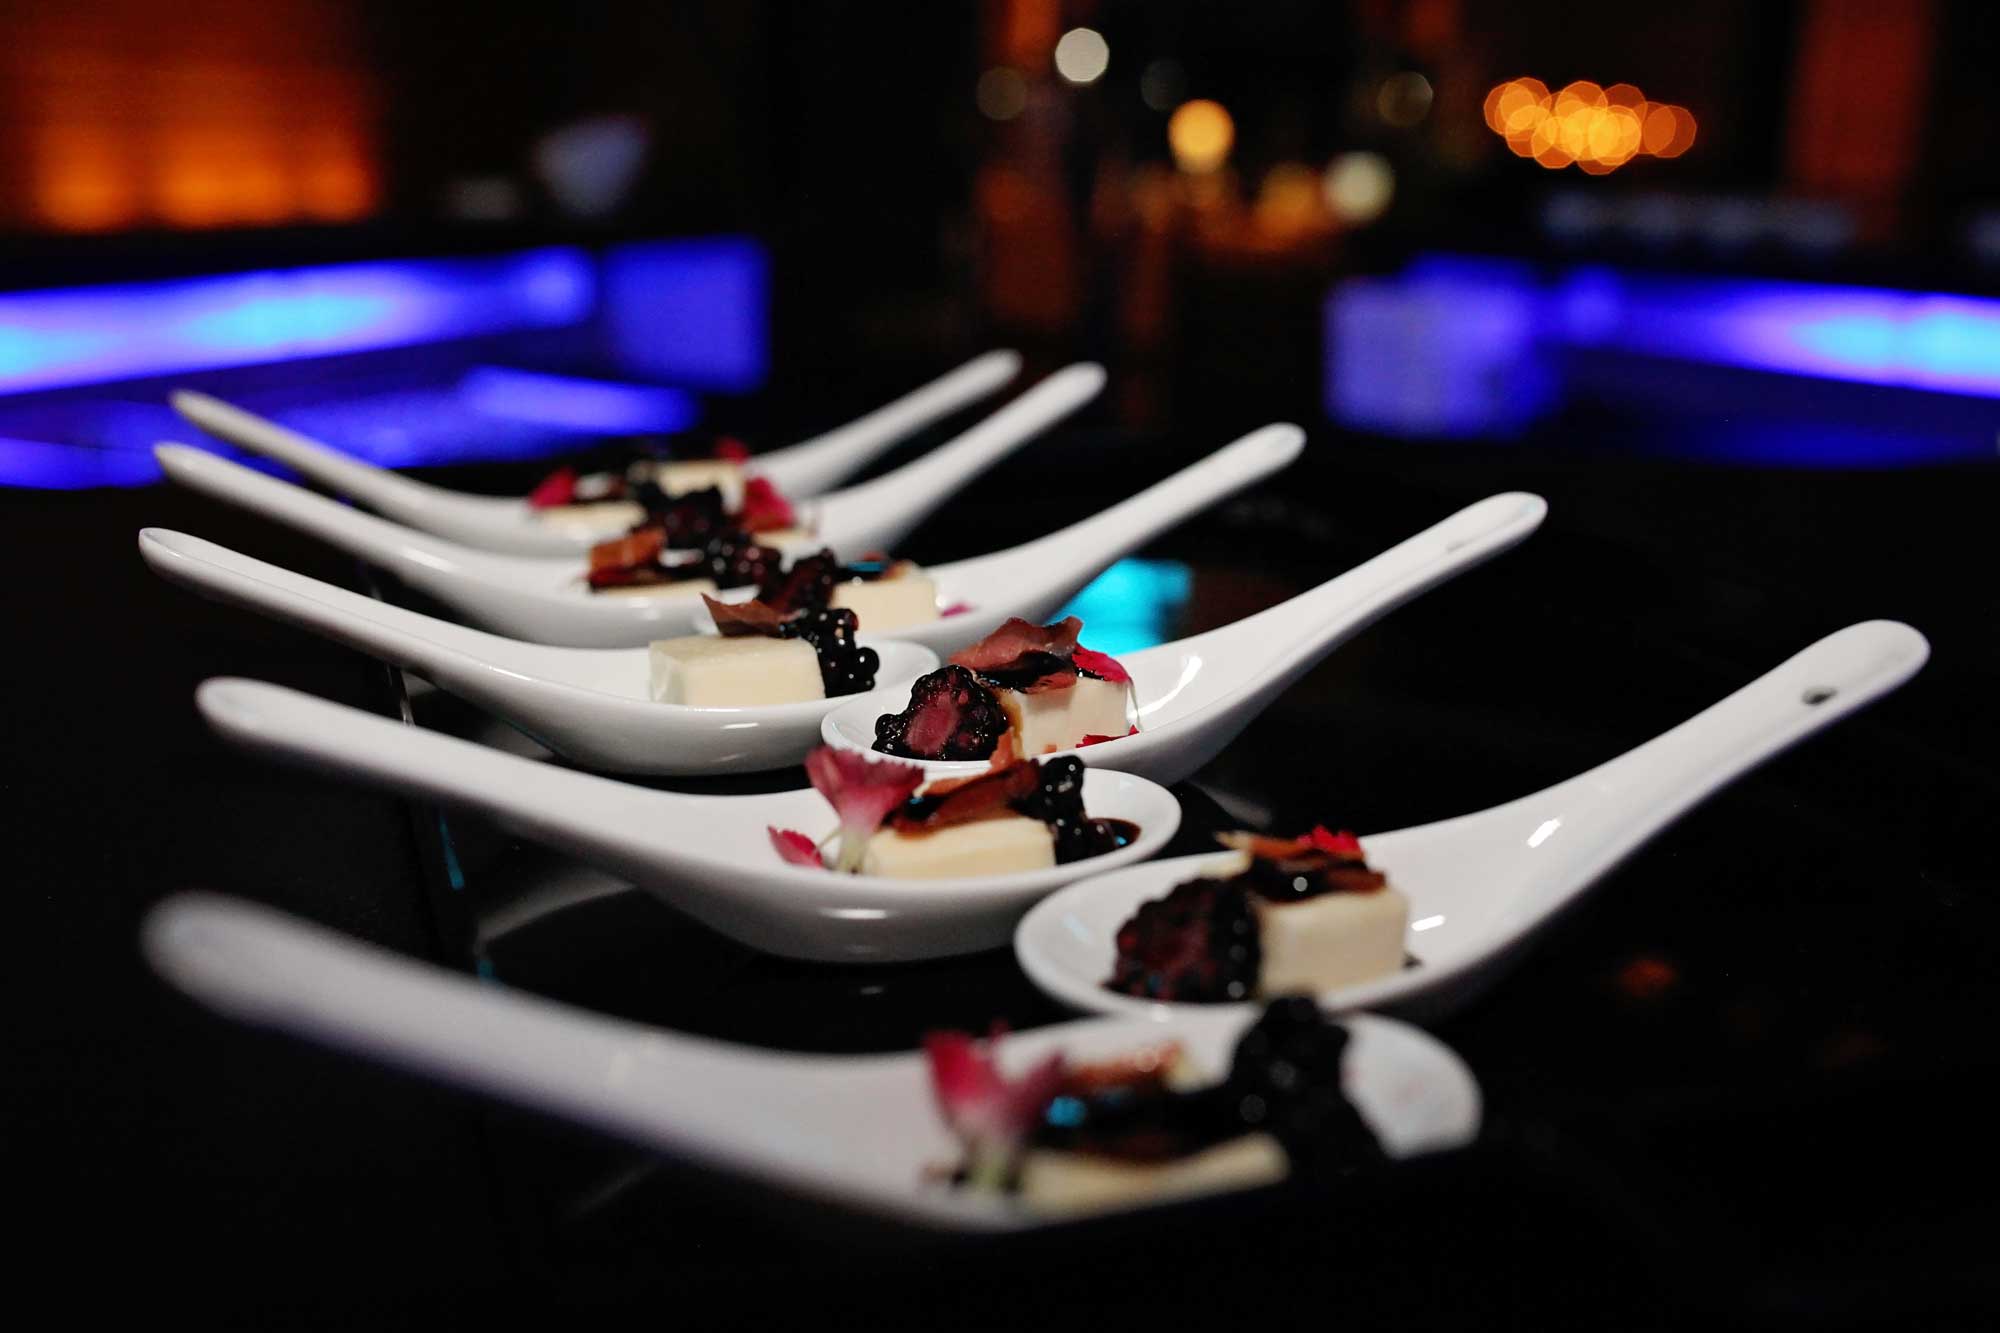 Desserts, individually set on spoons